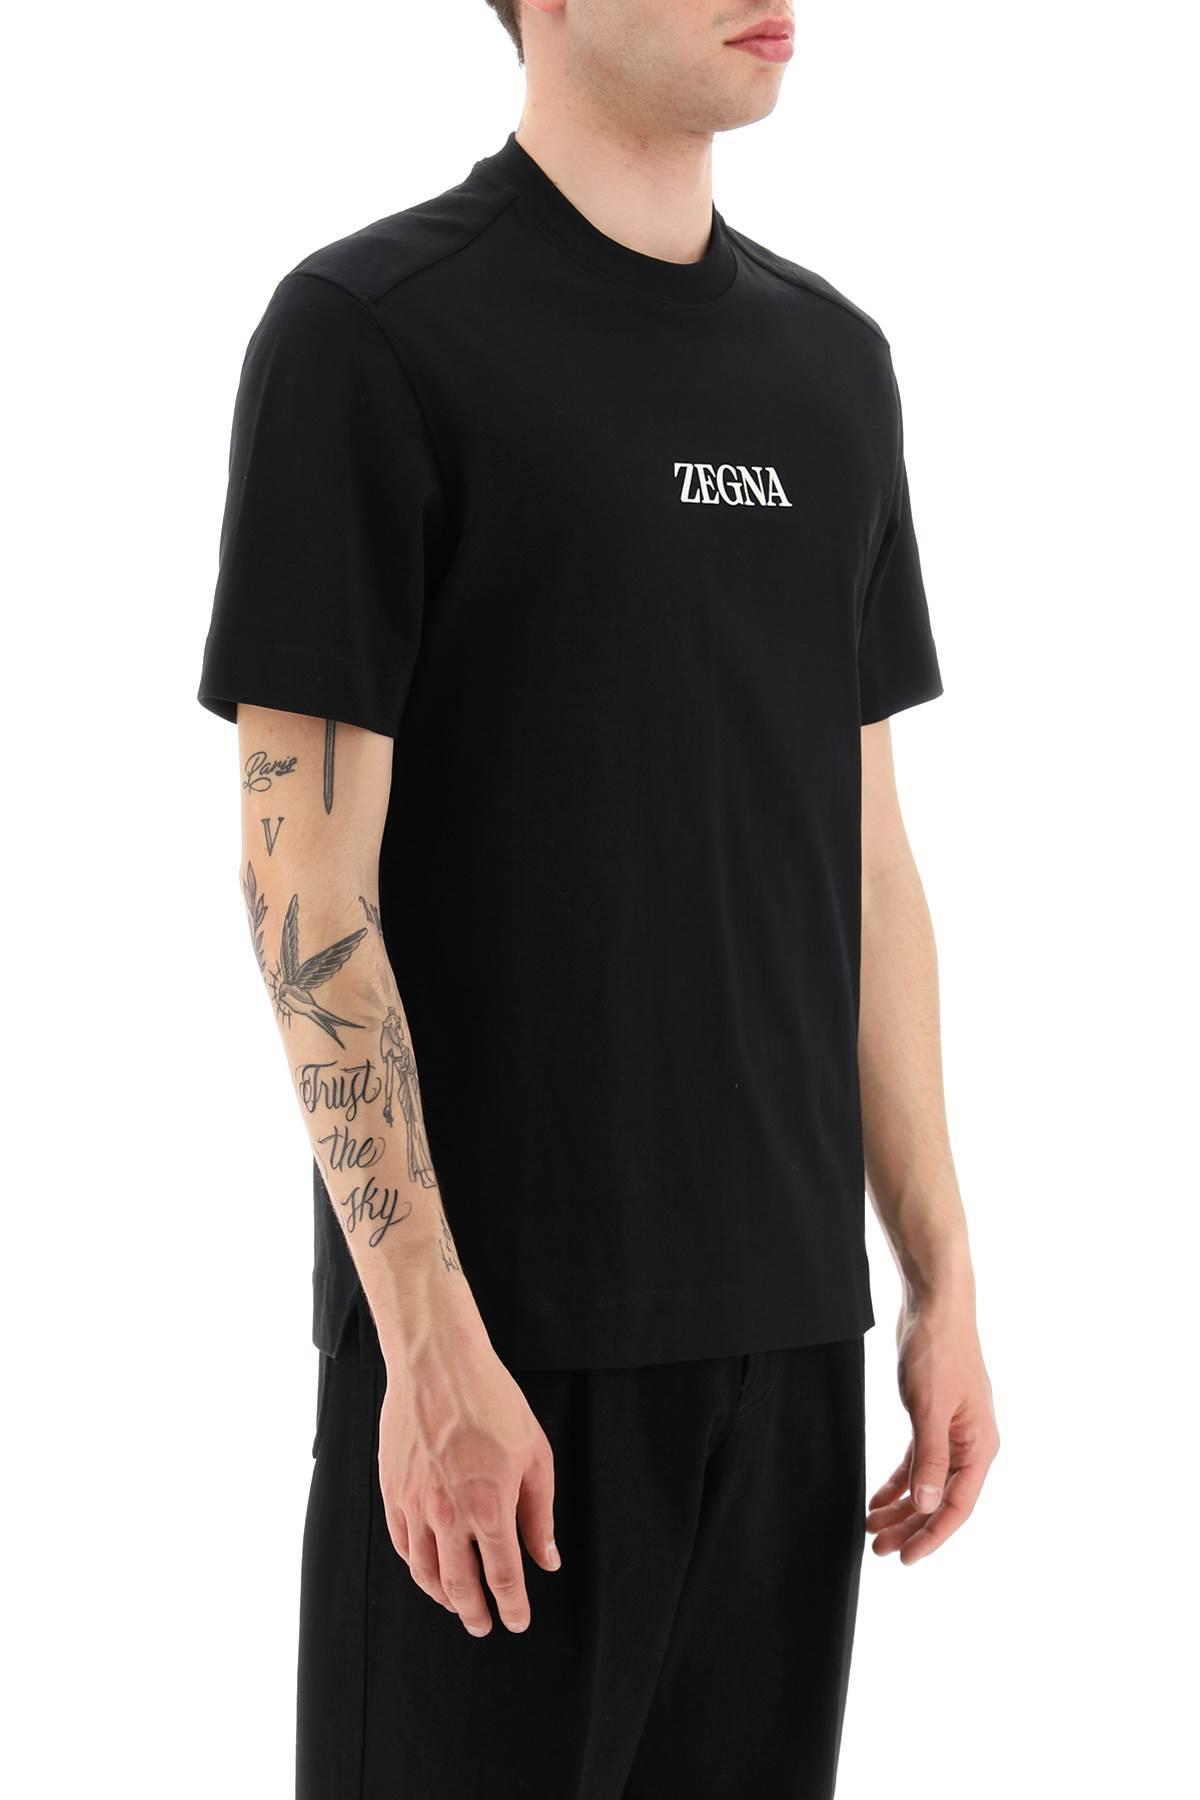 Zegna Logo T-shirt In Pure Cotton in Black for Men | Lyst